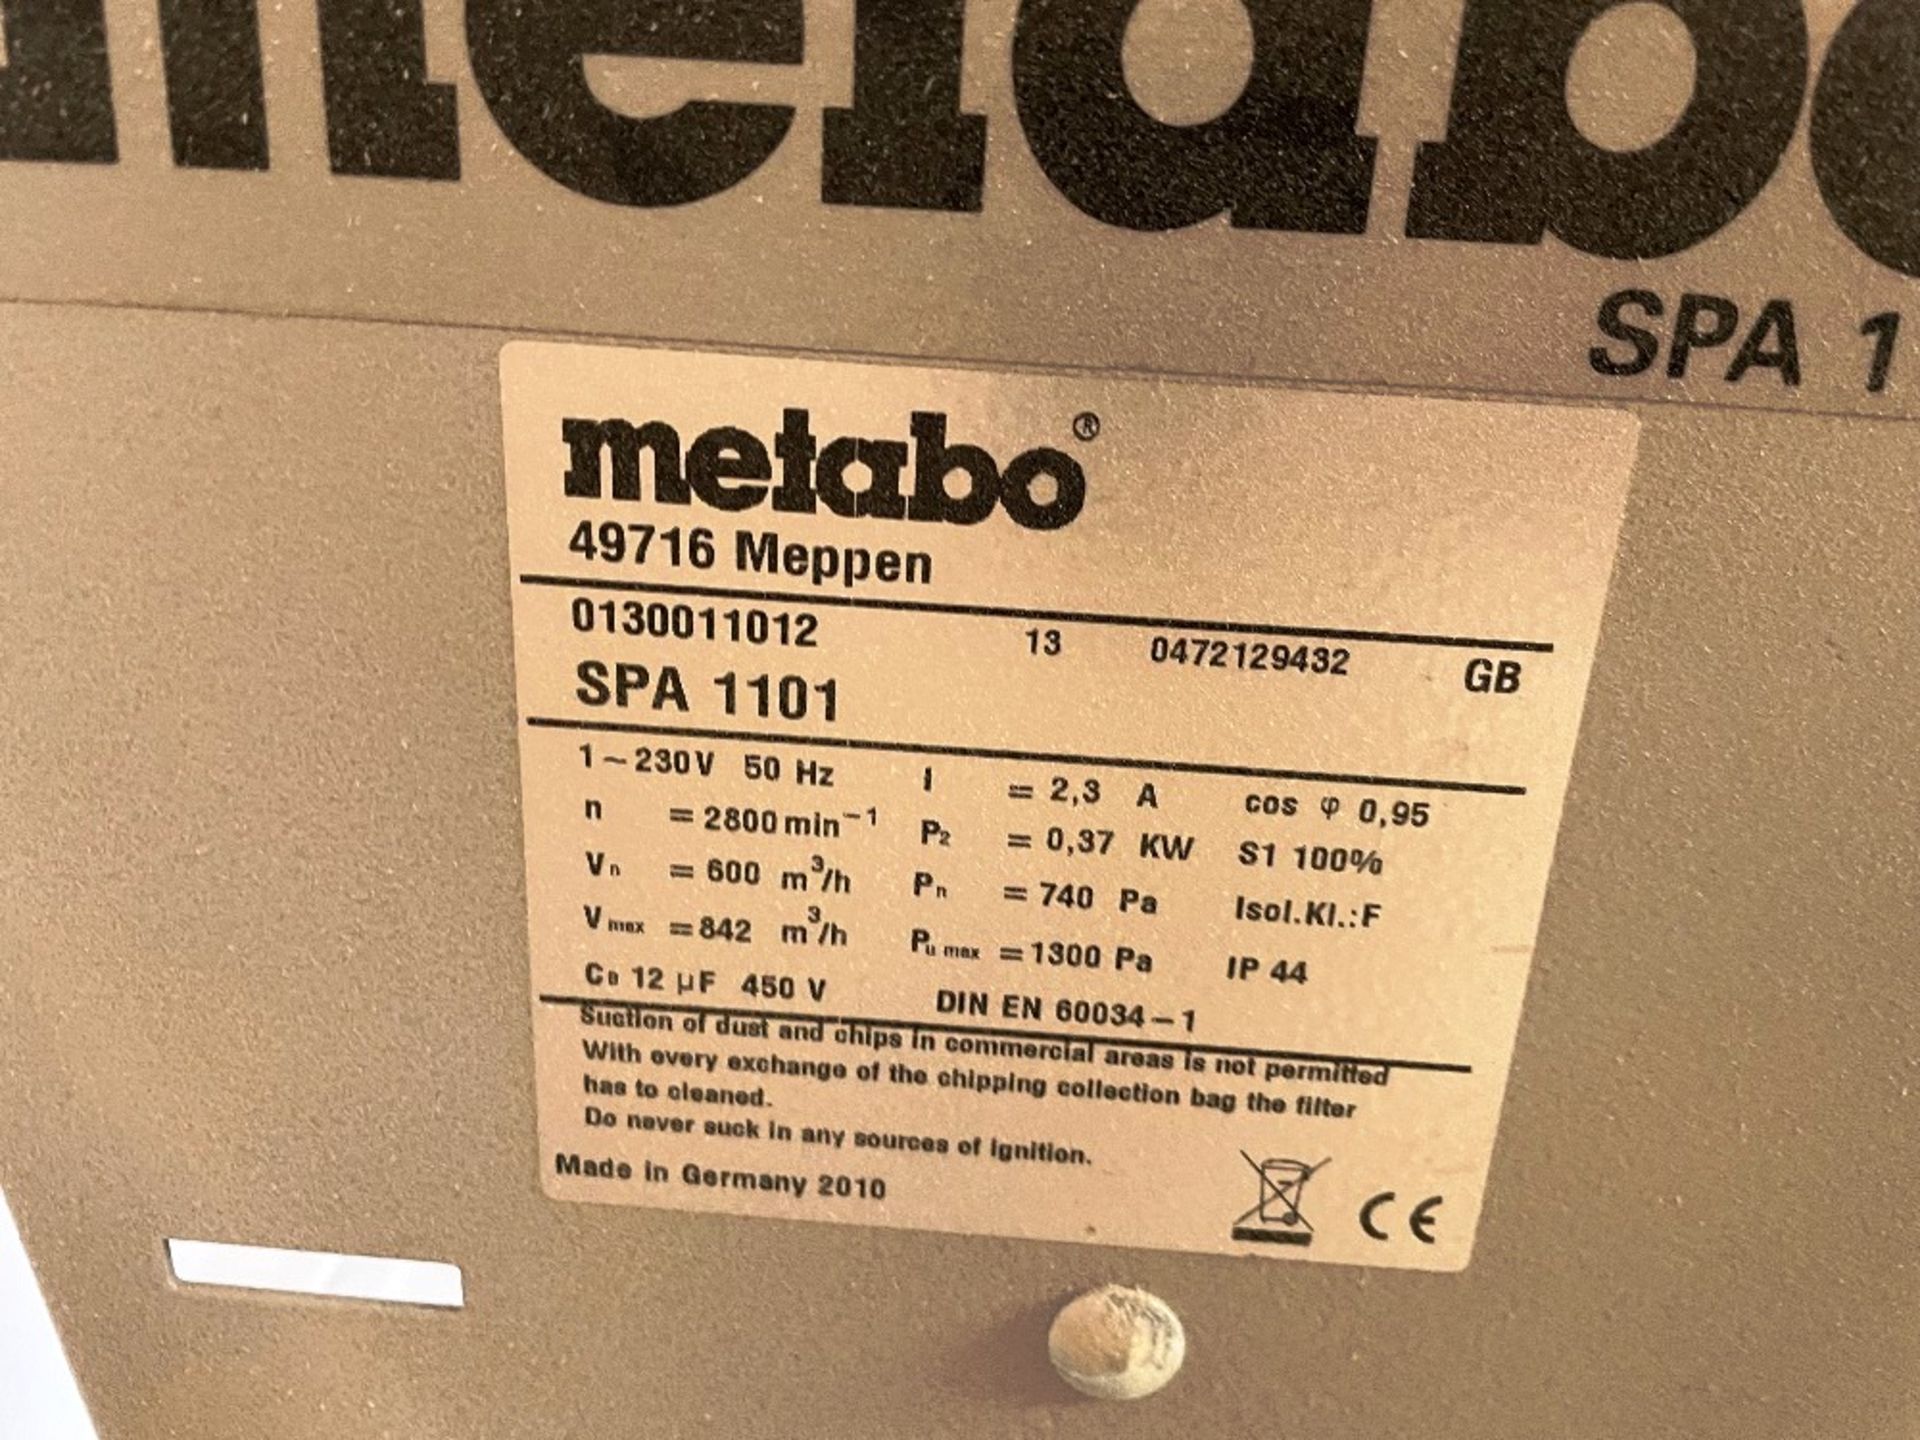 Metabo SPA 1101 Chip/Dust Extractor - Image 4 of 4